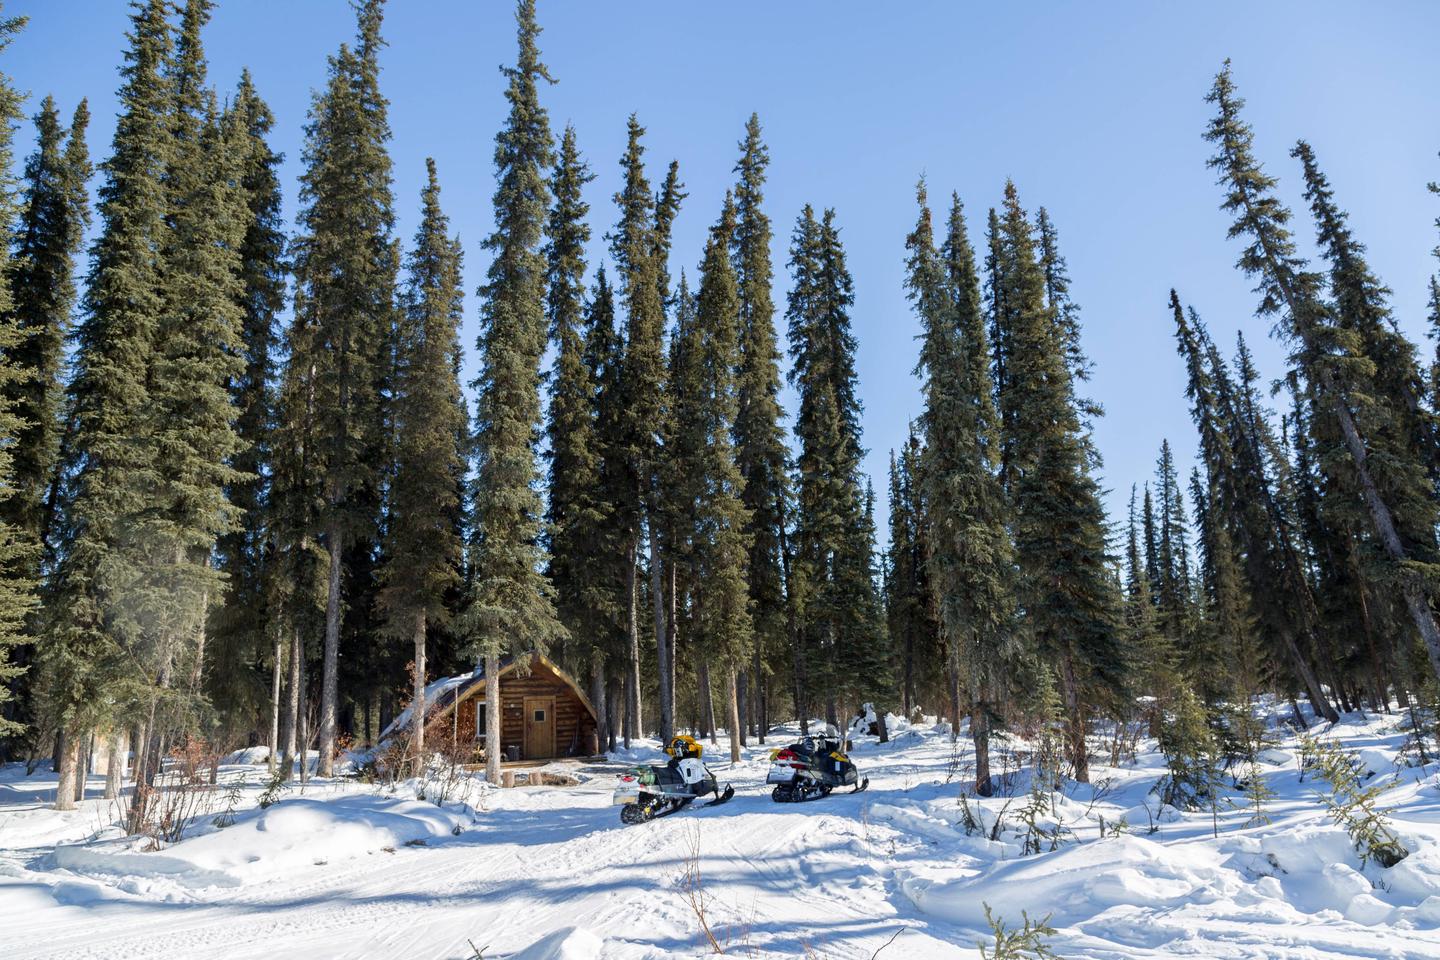 Winter view of a log cabin surrounded by tall treesRichard's Cabin is located in a grove of tall spruce trees.